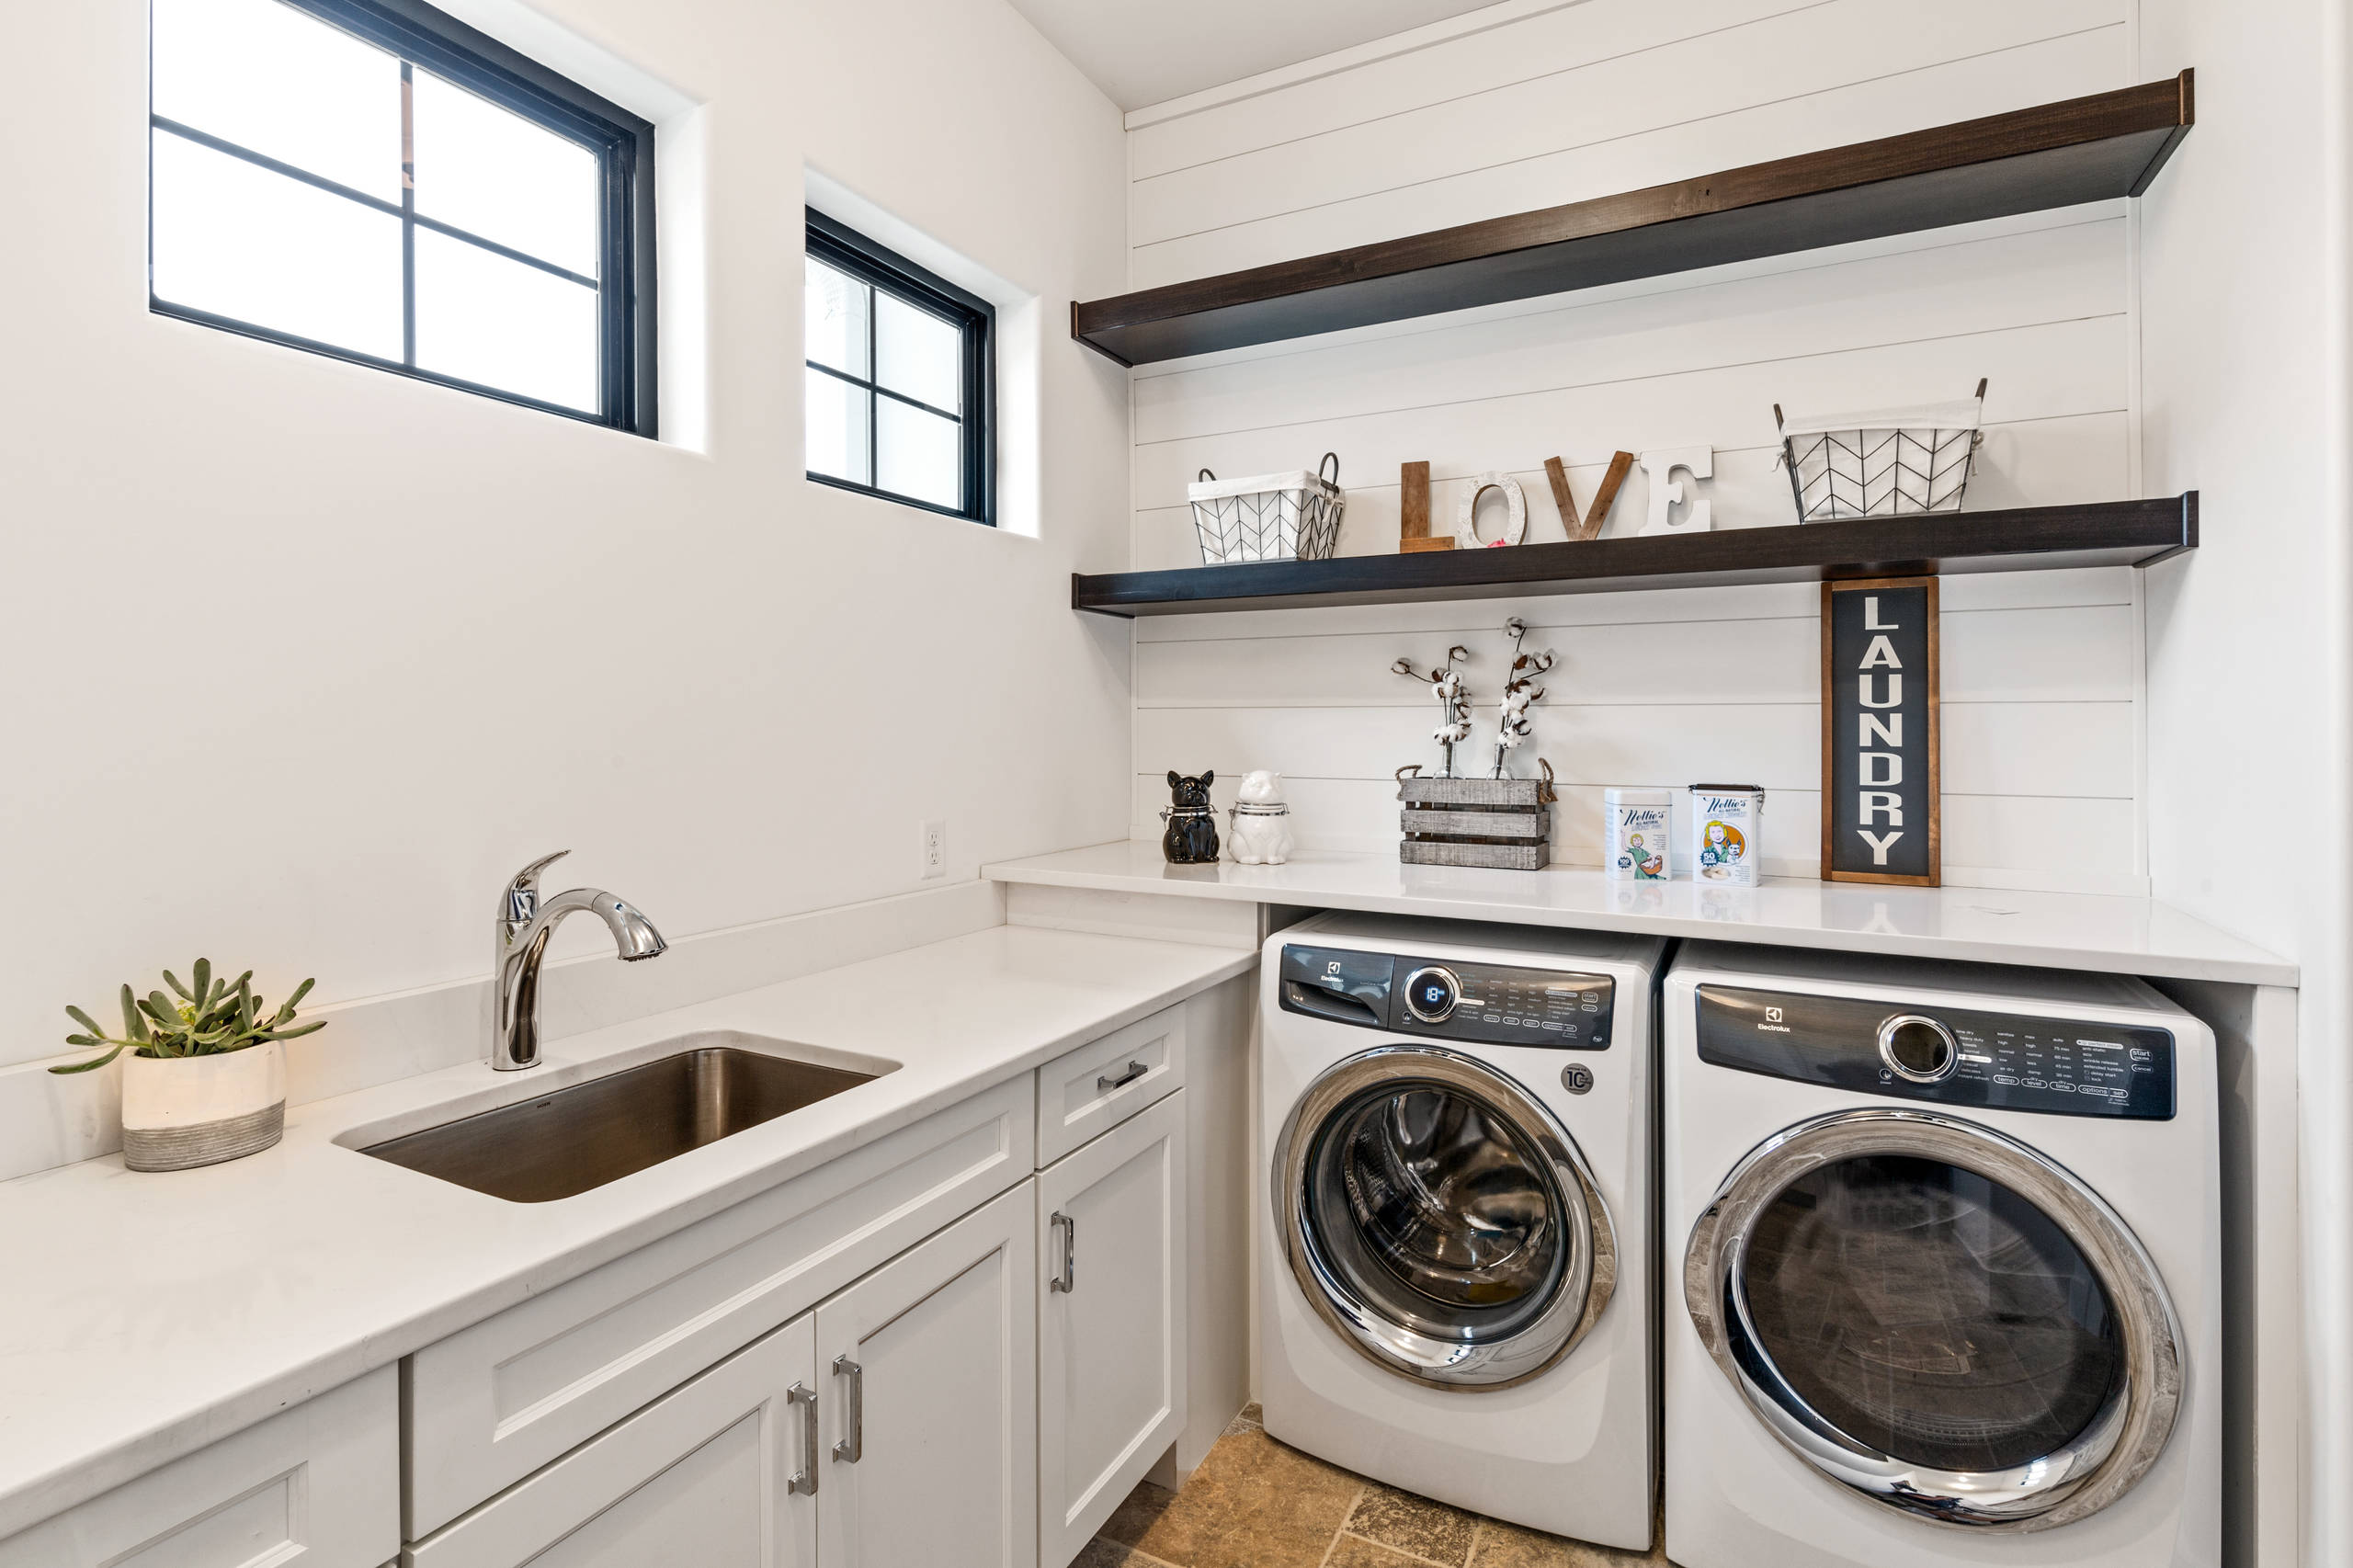 https://st.hzcdn.com/simgs/pictures/laundry-rooms/the-savannah-best-of-ohio-custom-home-over-5-000-sf-justin-doyle-homes-img~ddc16dad0bfeef86_14-1167-1-e47e9ed.jpg